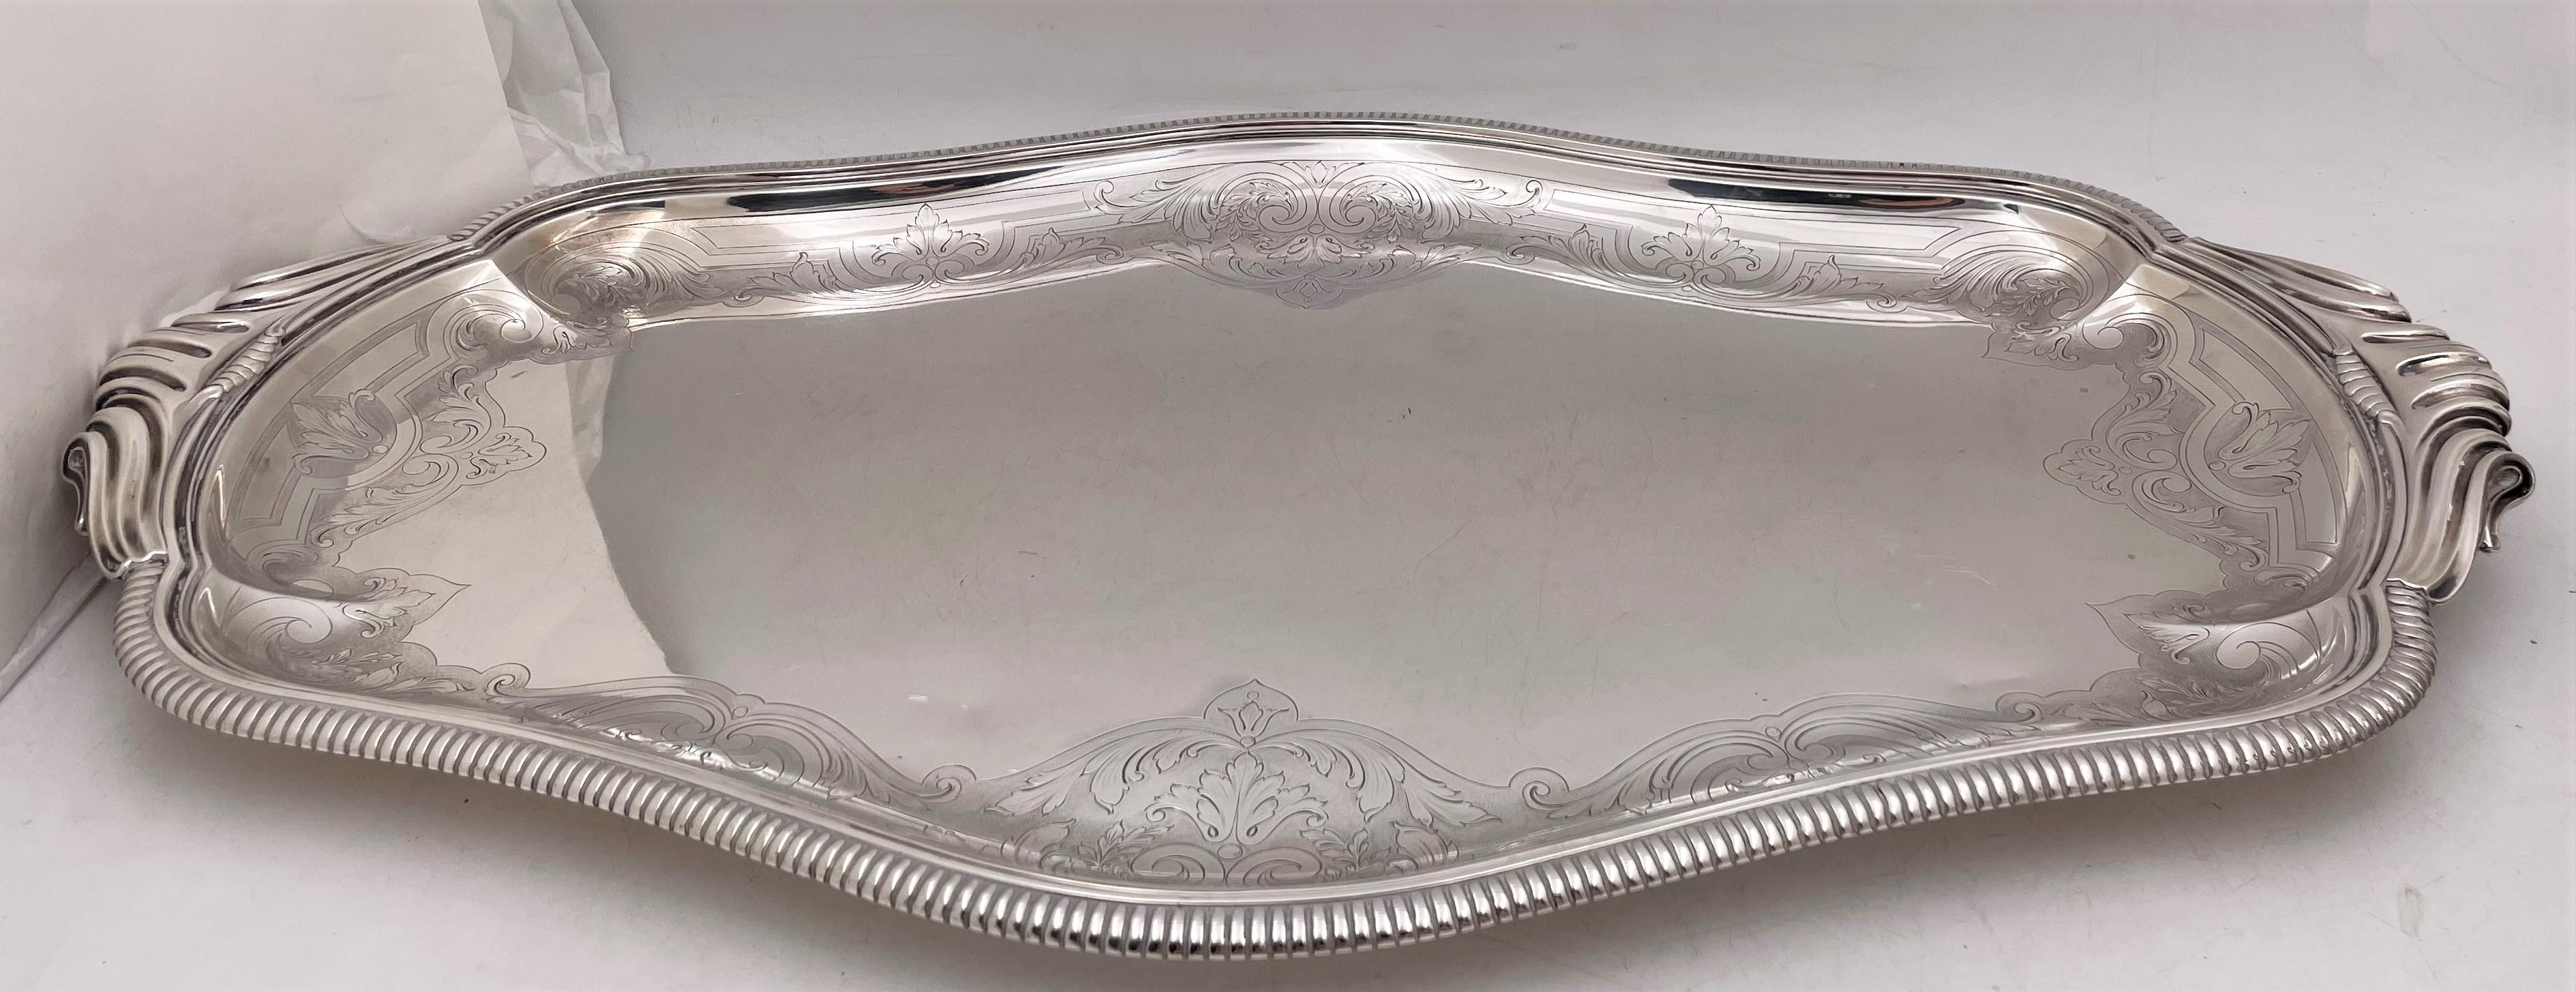 Tetard, French 0.950 (higher purity than sterling) silver 7-piece tea set, beautifully adorned with curvilinear and stylized natural motifs and well-rendered faces, in Art Deco style, presumably from the early 20th century, consisting of:

- a